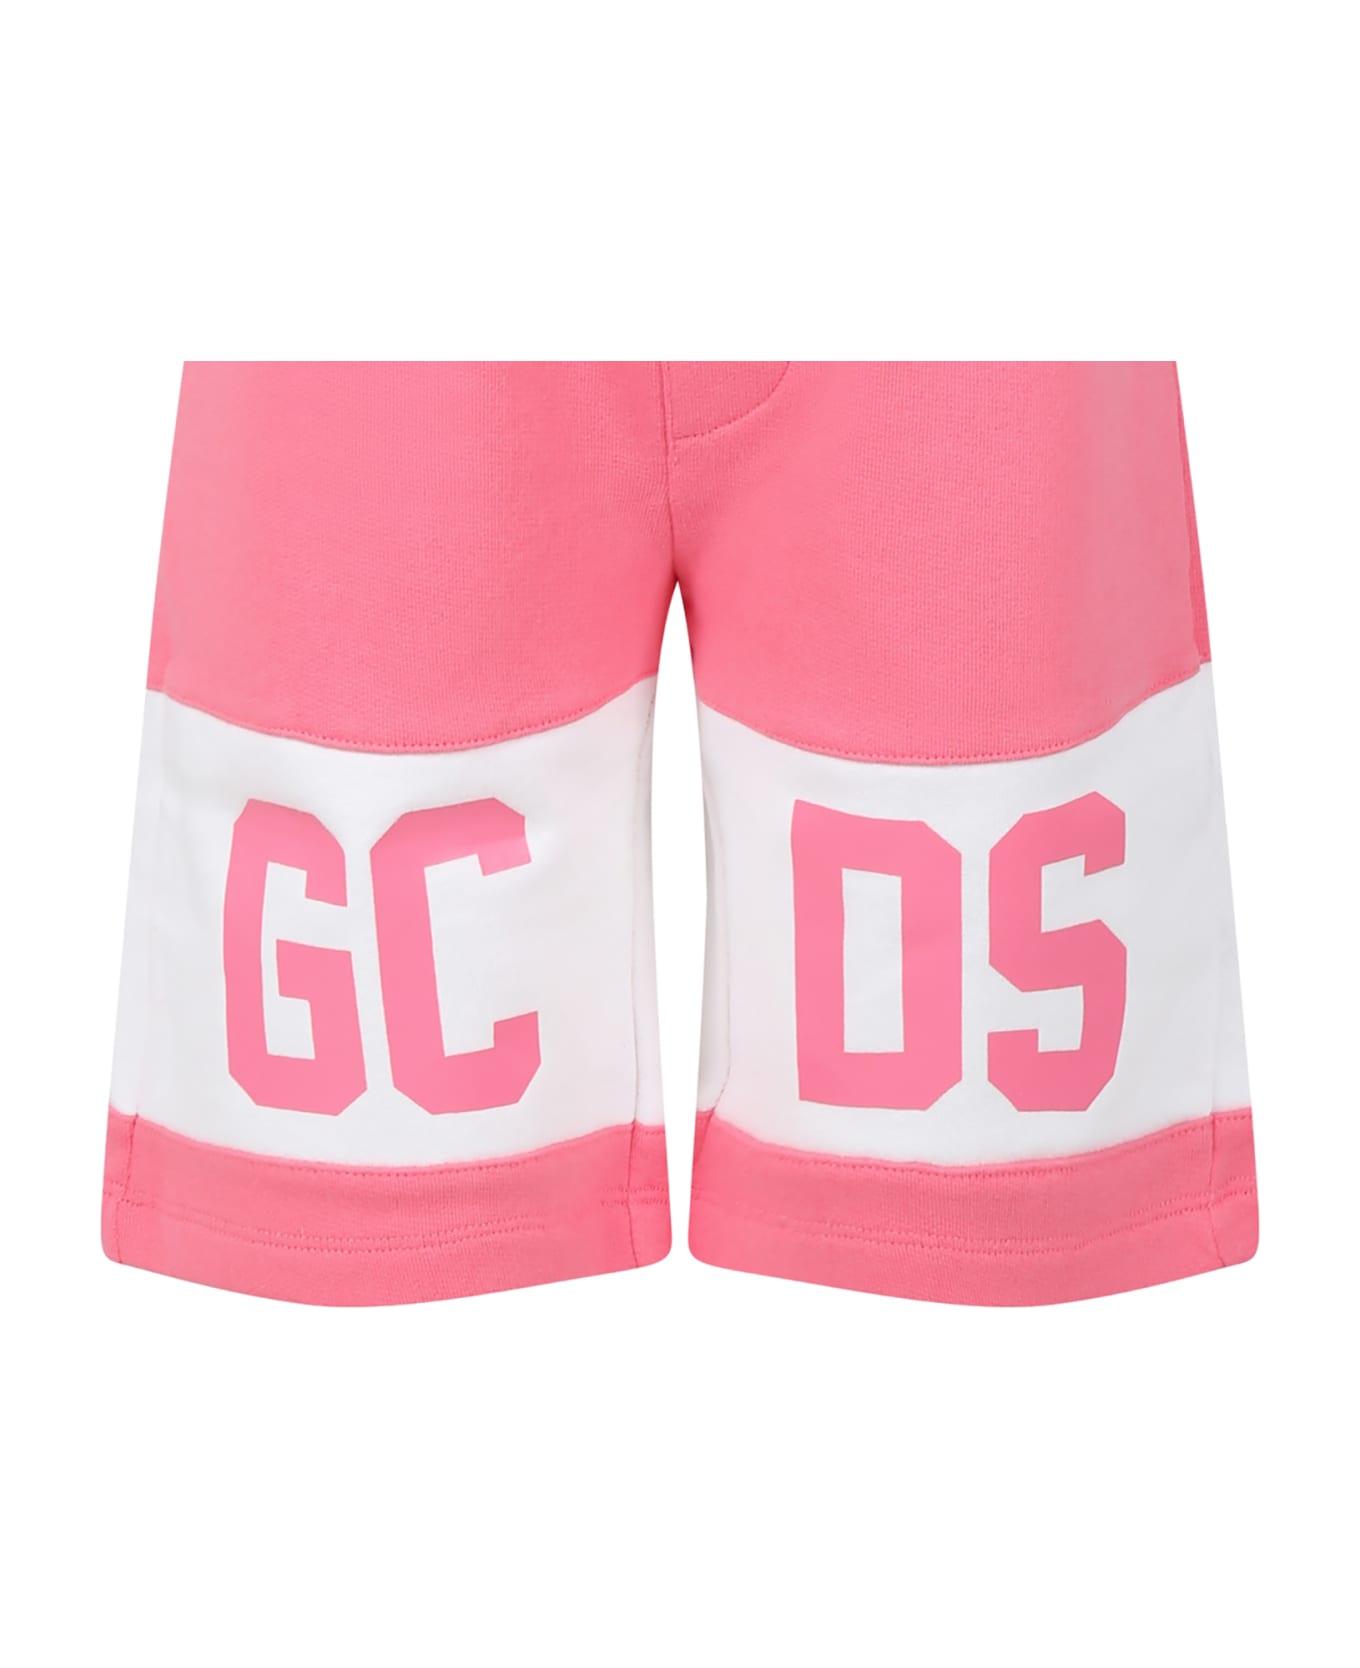 GCDS Mini Pink Sports Shorts For Boy With Logo - Pink ボトムス